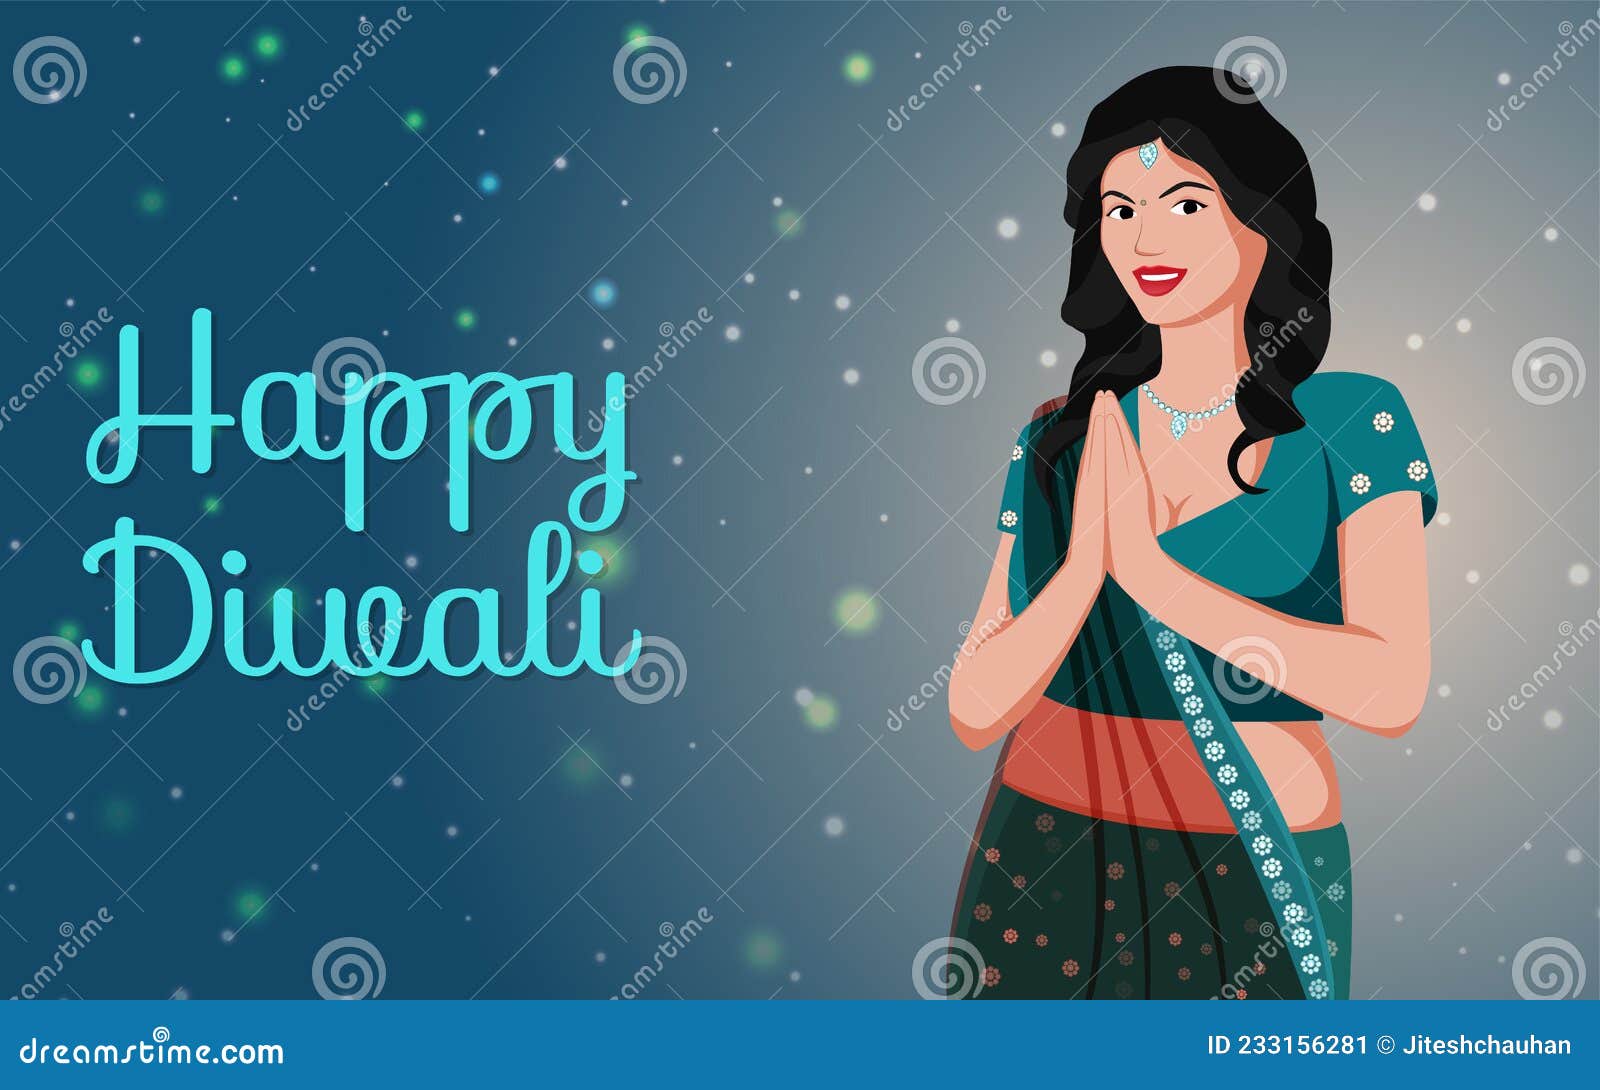 🔥 Diwali Special Editing Background With Girl 1080p